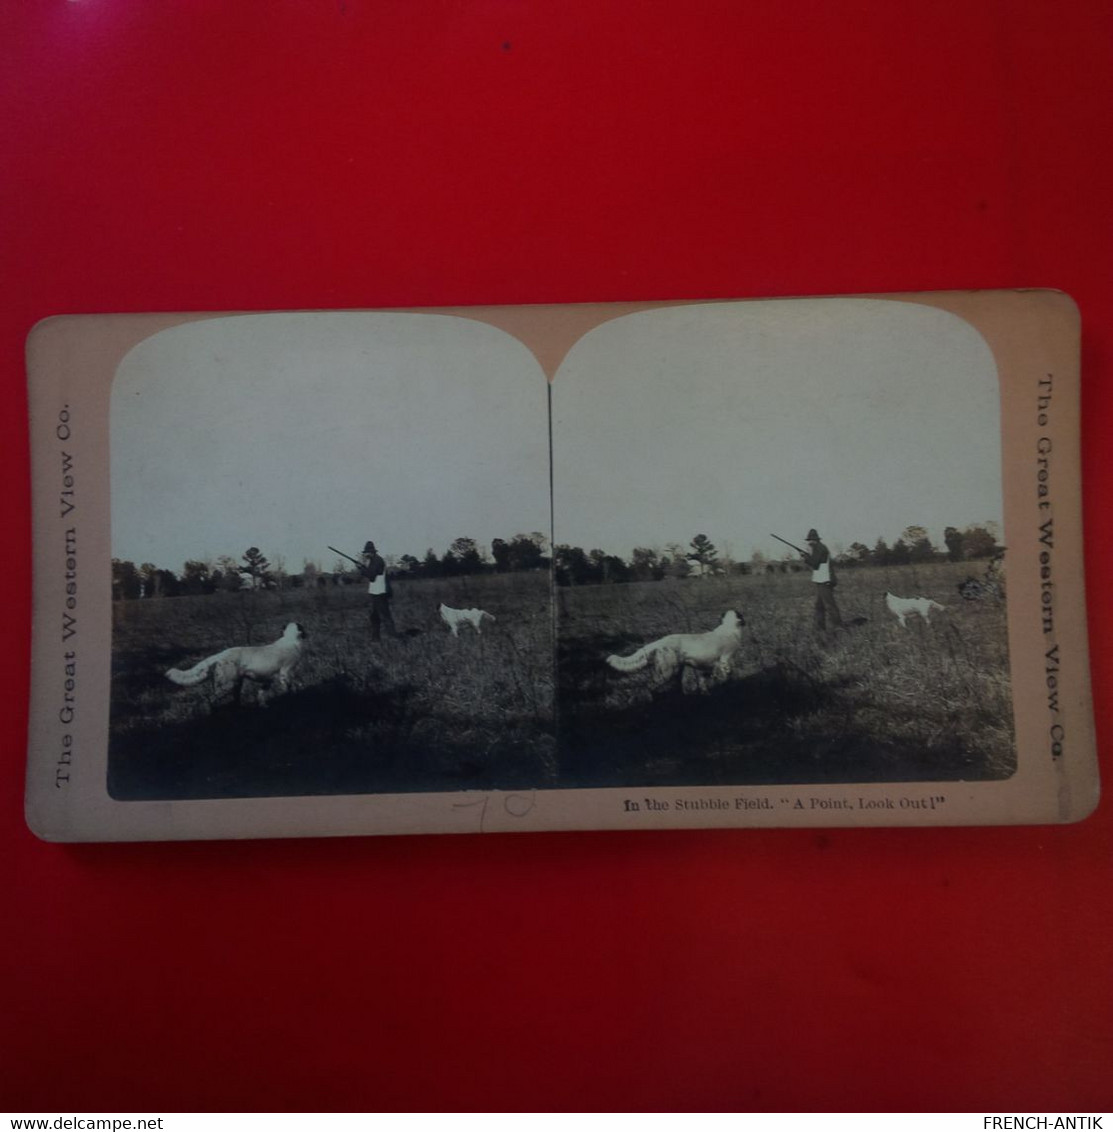 PHOTO STEREO THE GREAT WESTERN IN THE STUBBLE FIELD A POINT LOOK OUT ! CHASSEUR - Stereoscopic